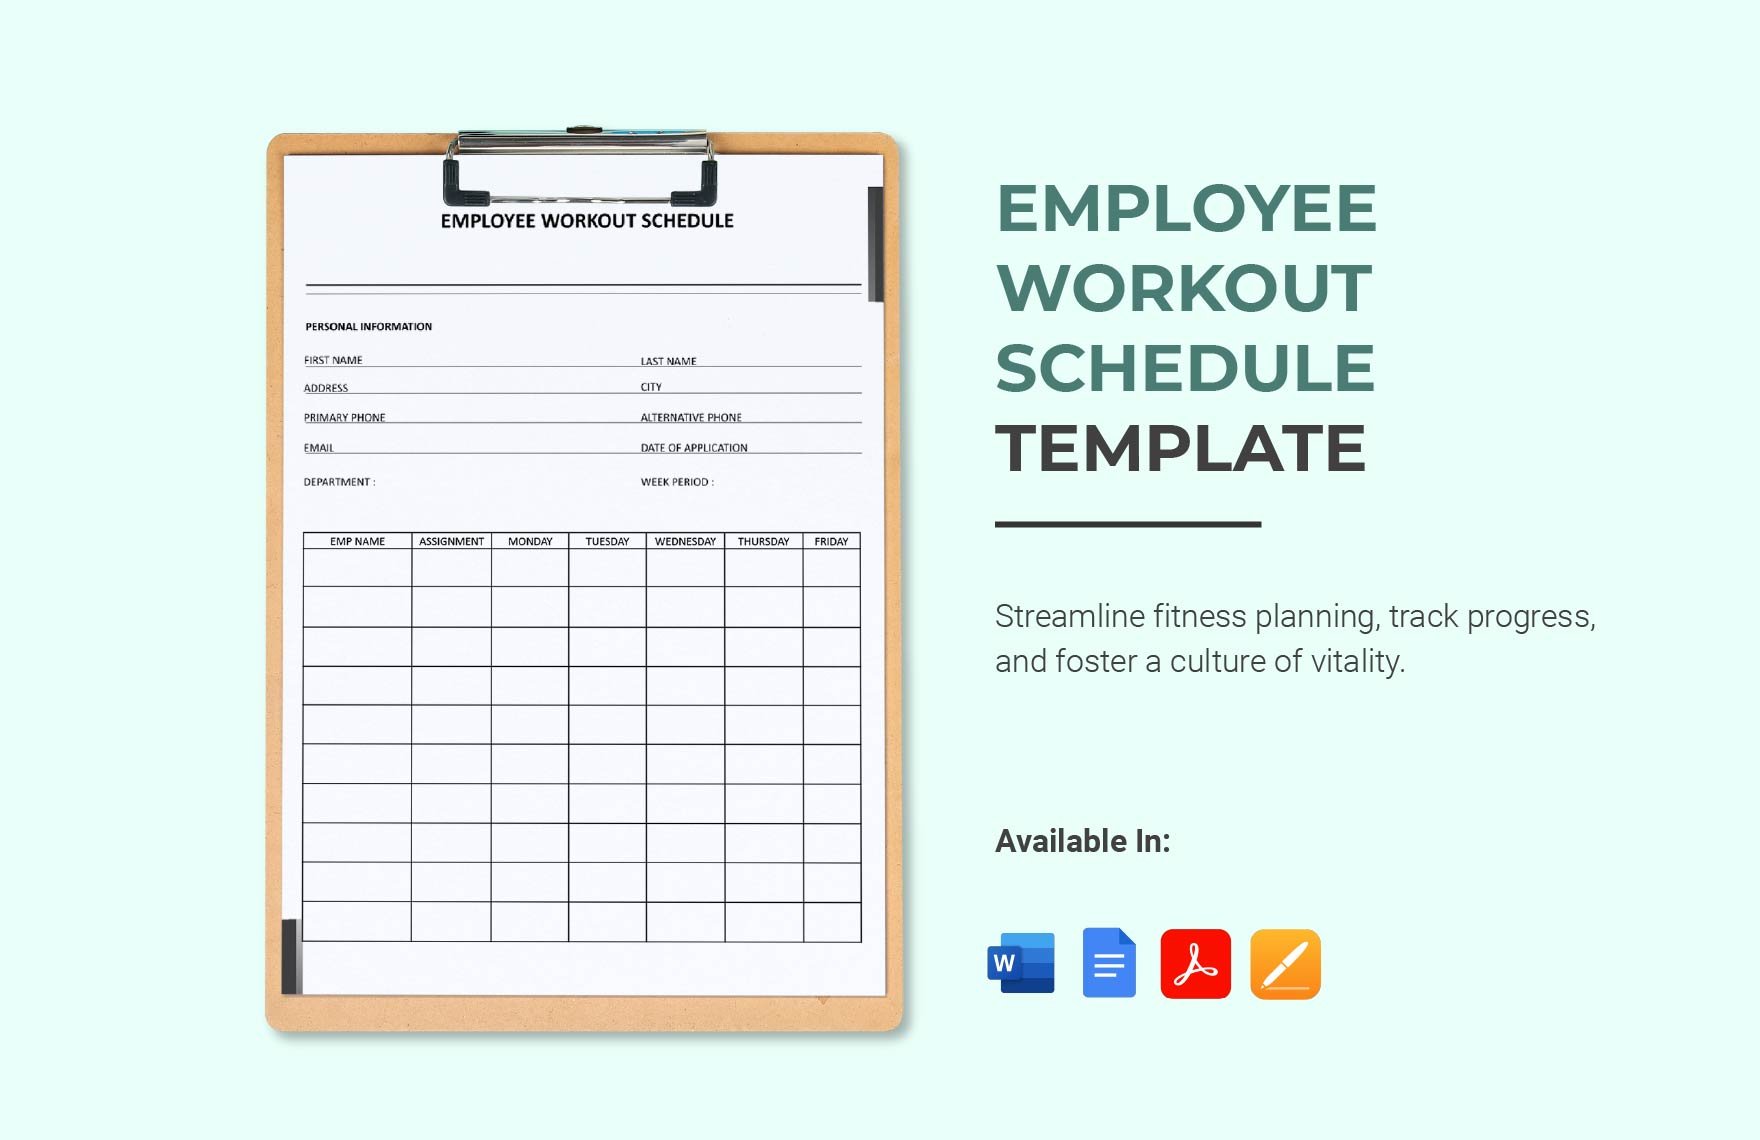 Employee Workout Schedule Template